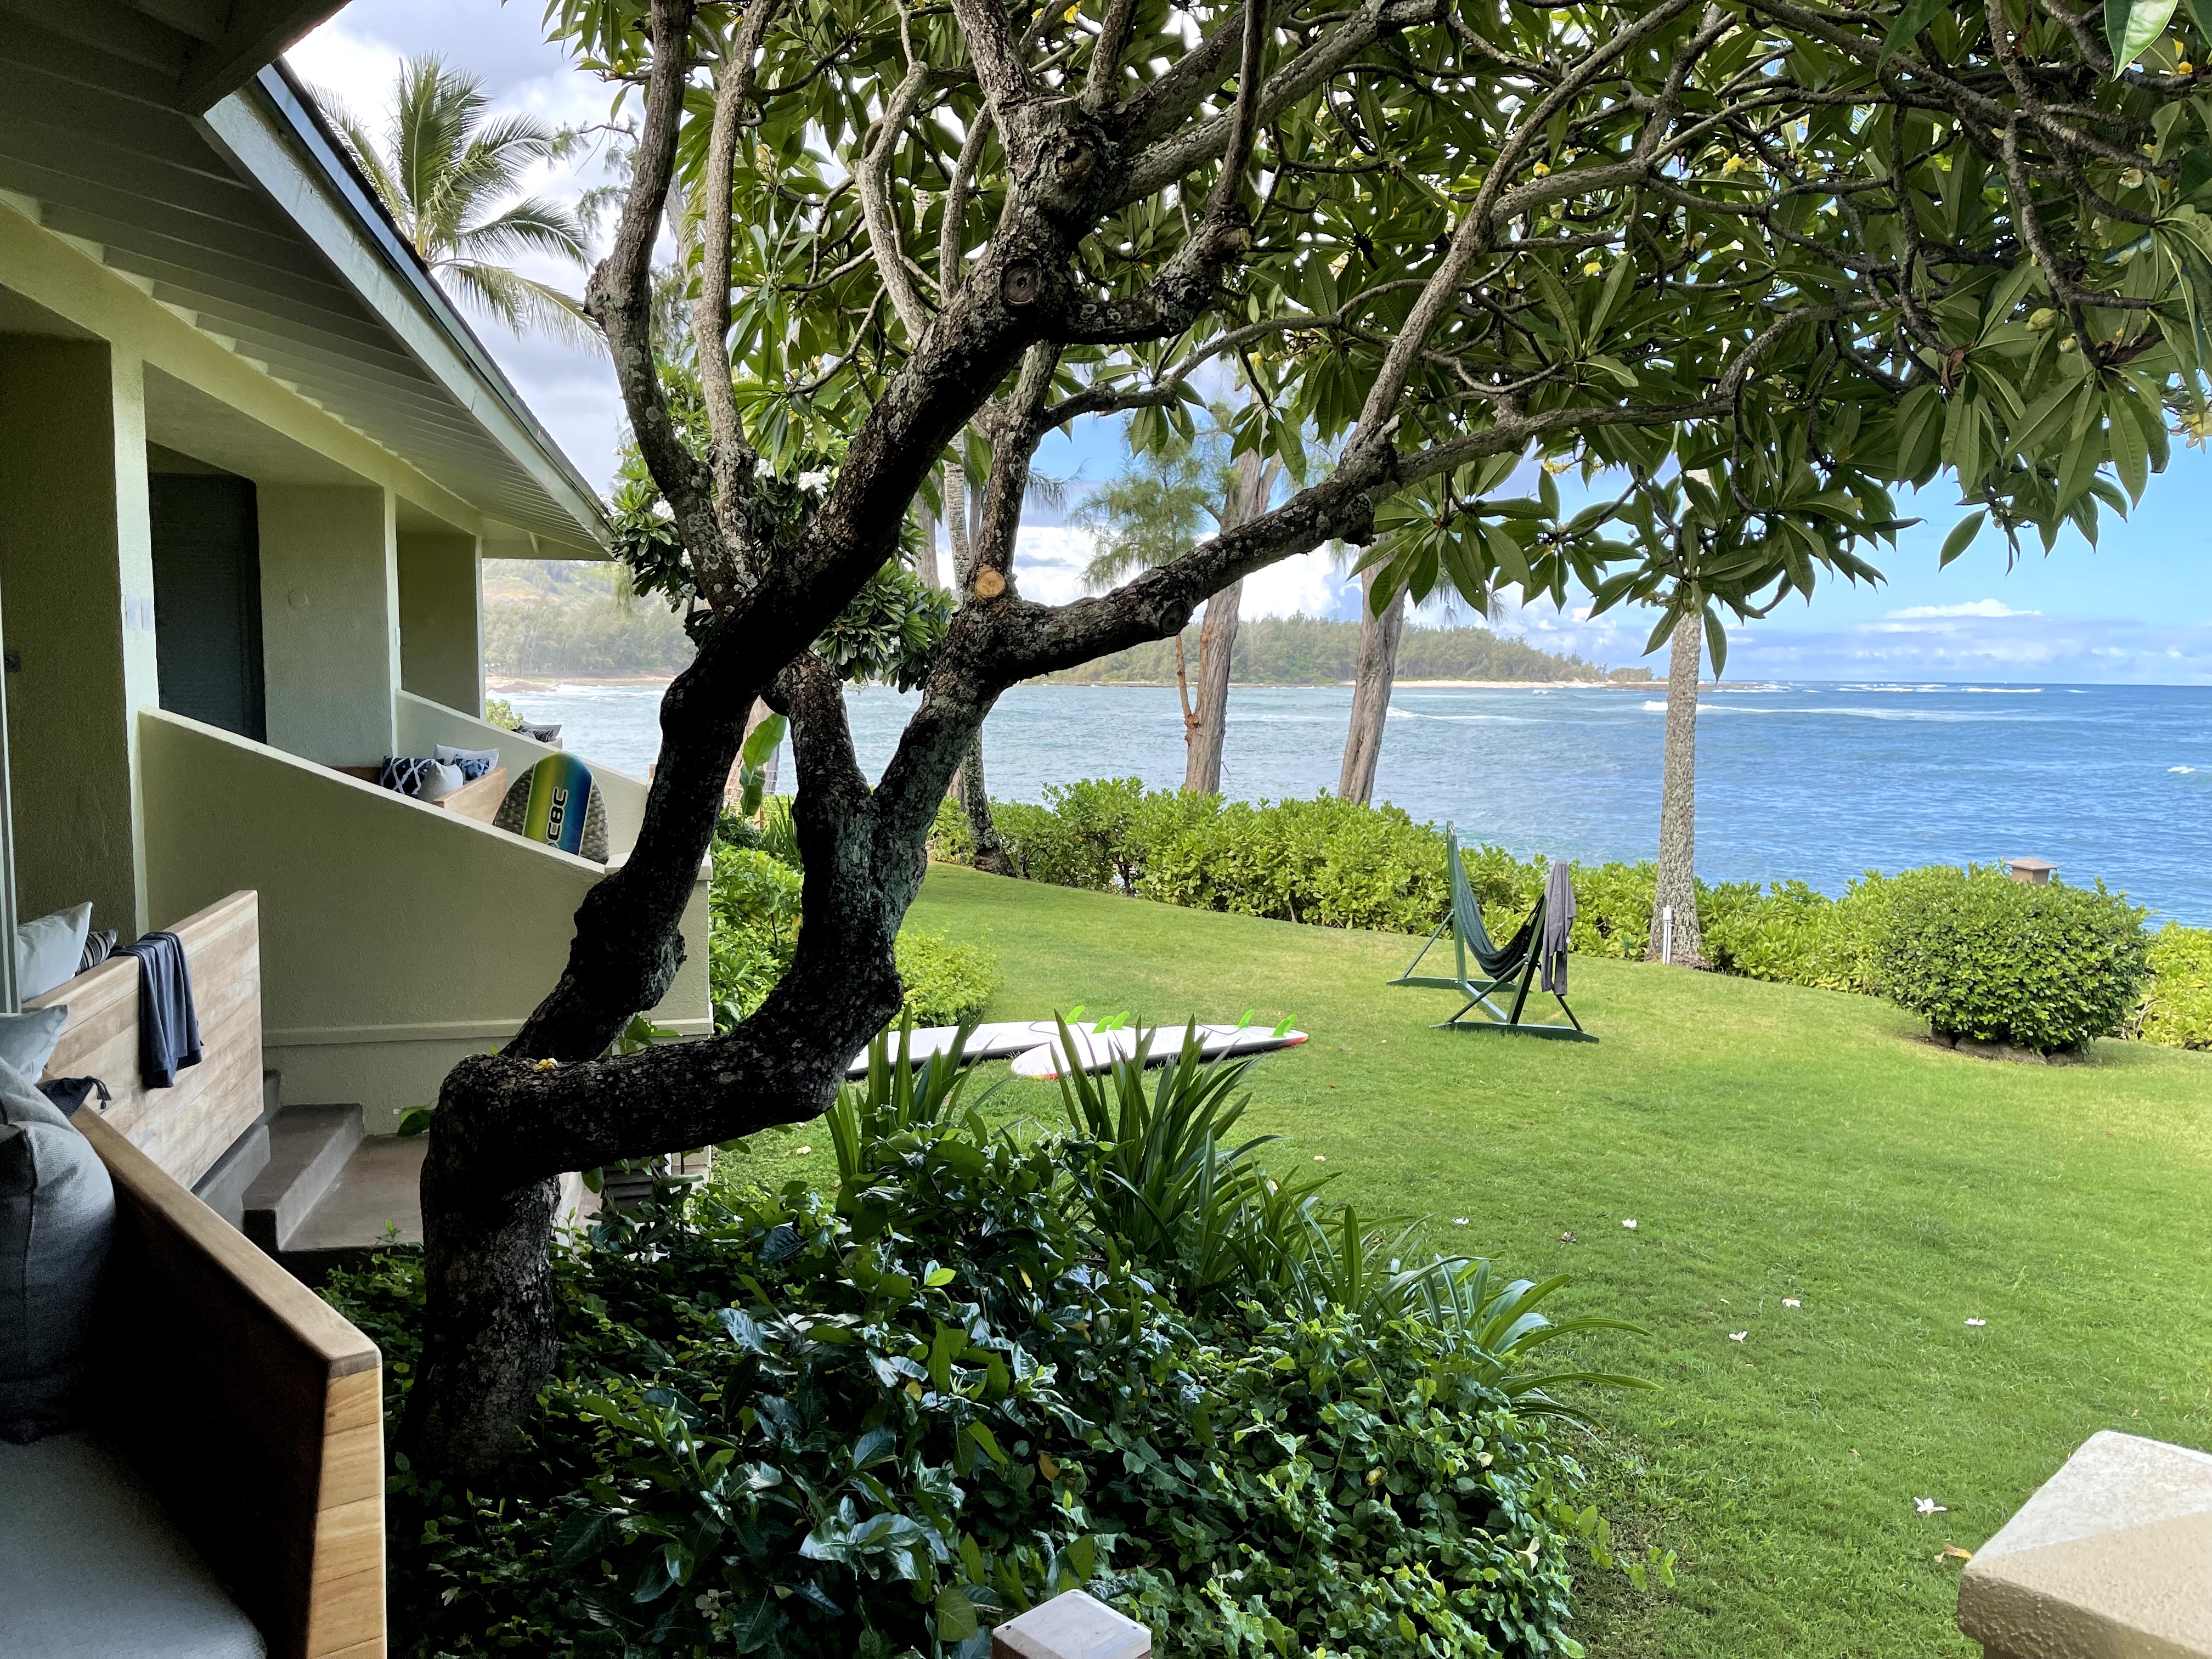 The view from an Ocean Bungalow at the remodeled Turtle Bay Resort in Oahu